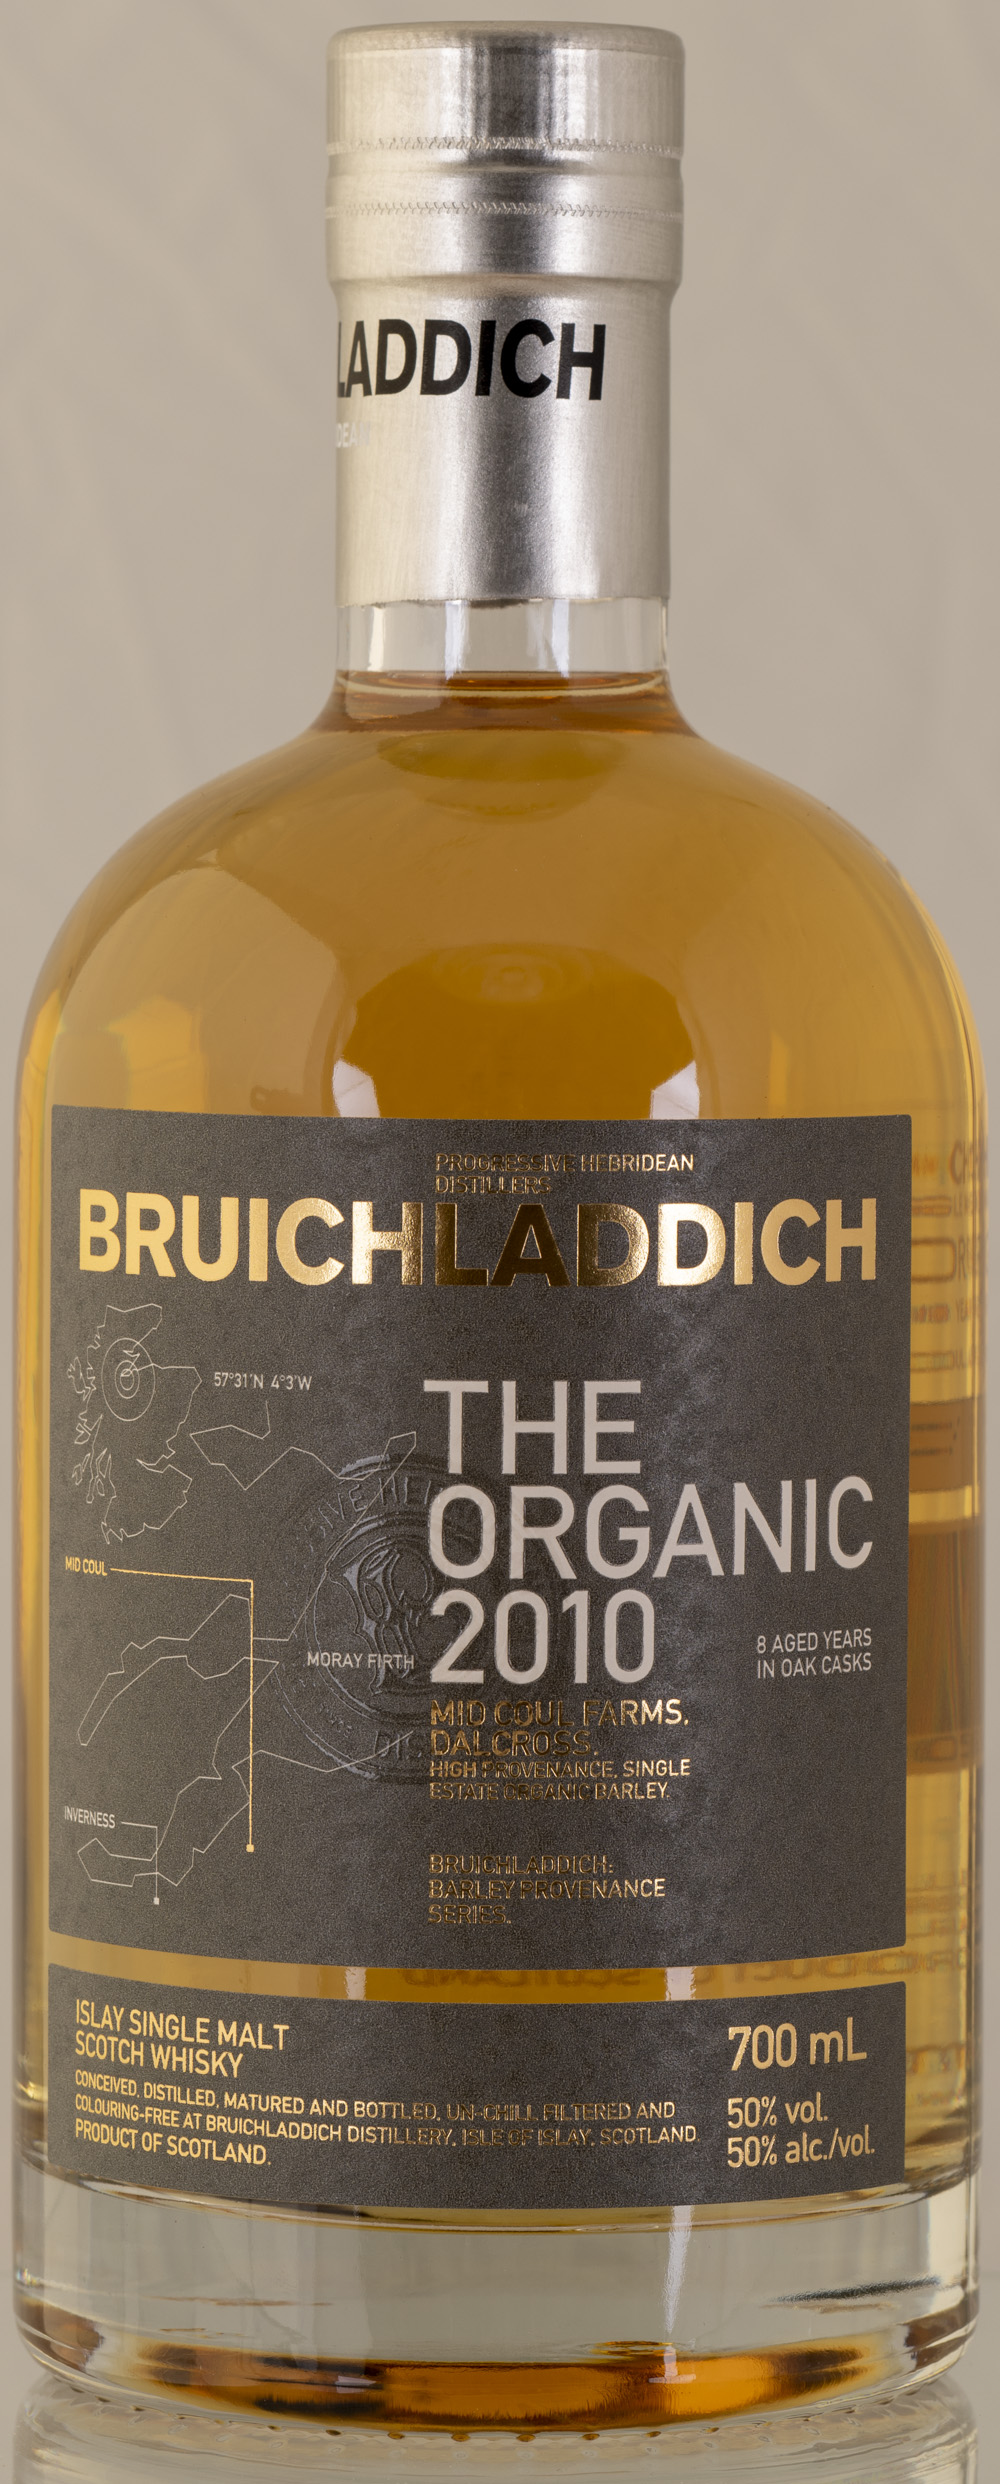 Billede: PHC_2288 - Bruichladdich the Organic 2010 Mid Coul Farms - bottle front.jpg